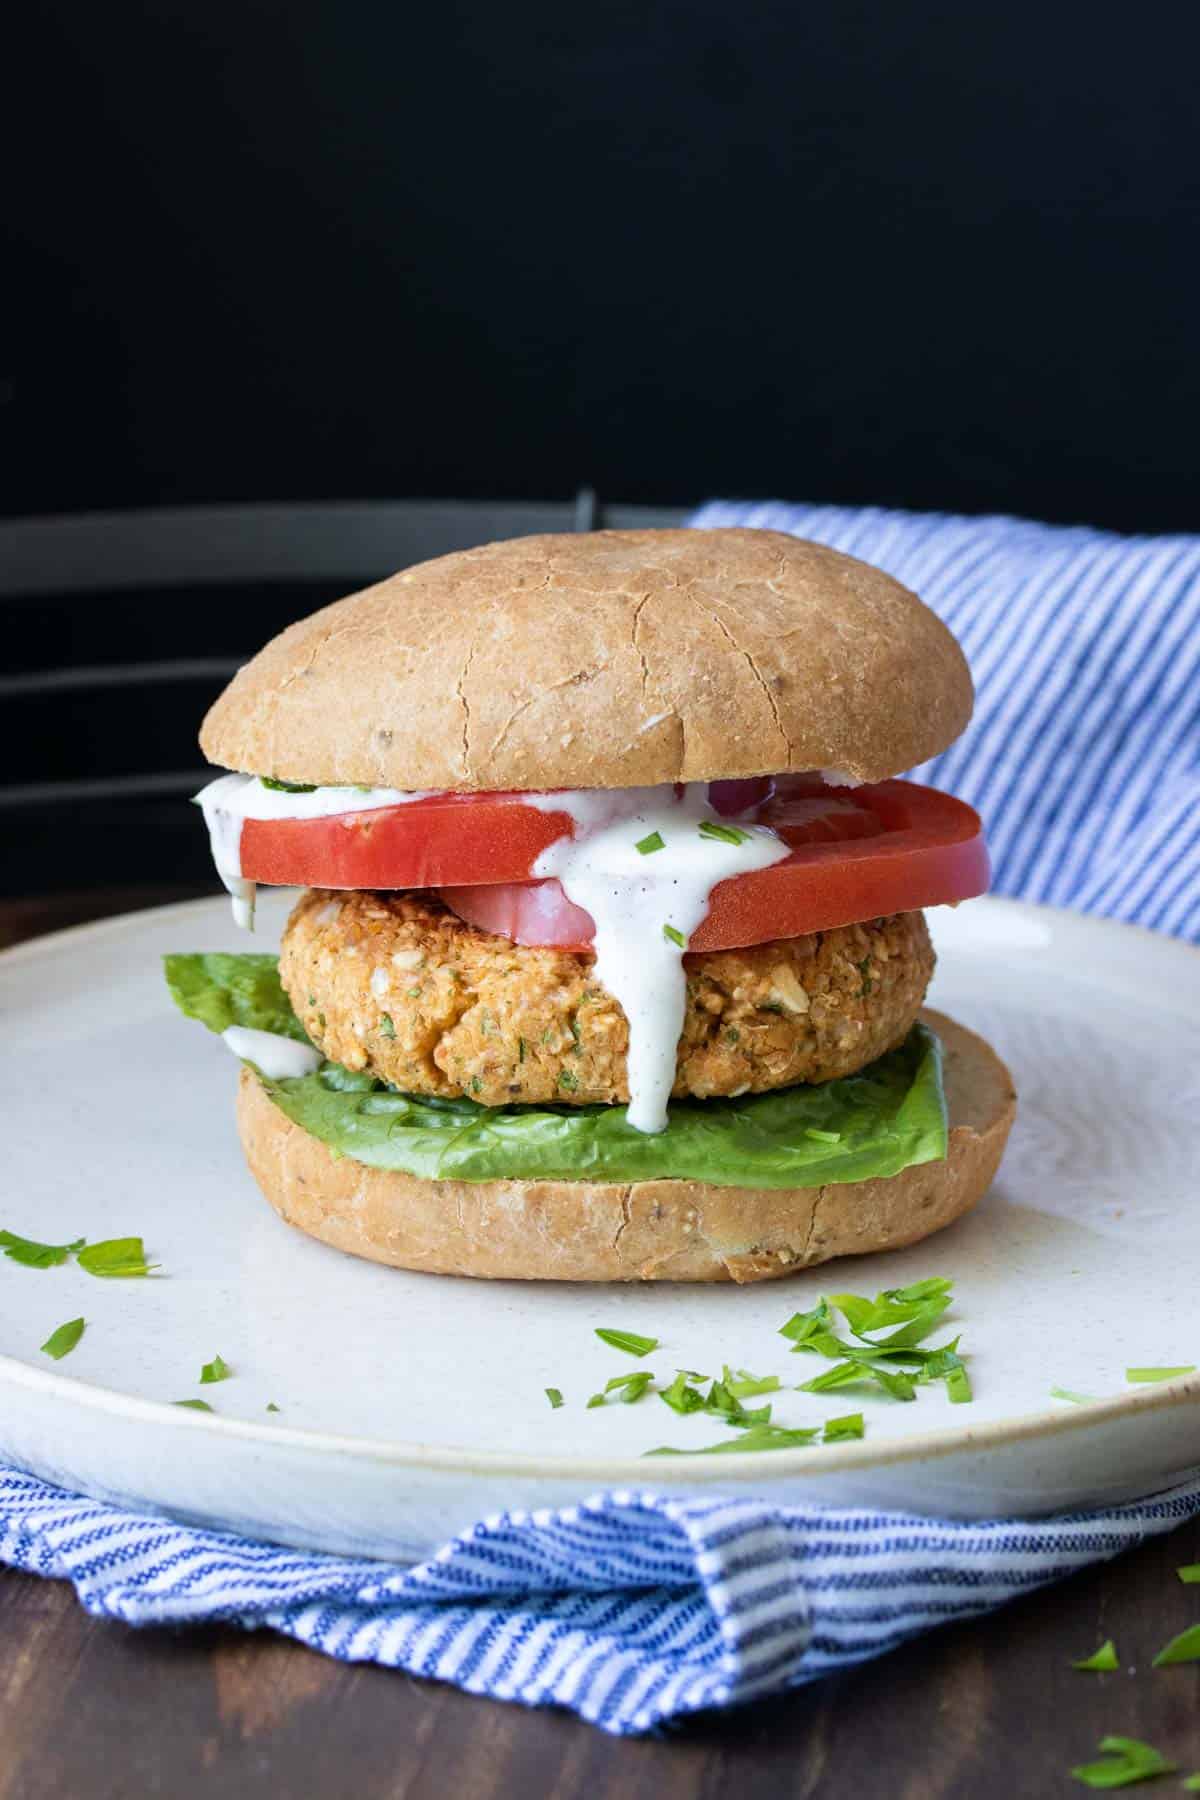 Chickpea burger on a bun with lettuce tomato and sauce dripping